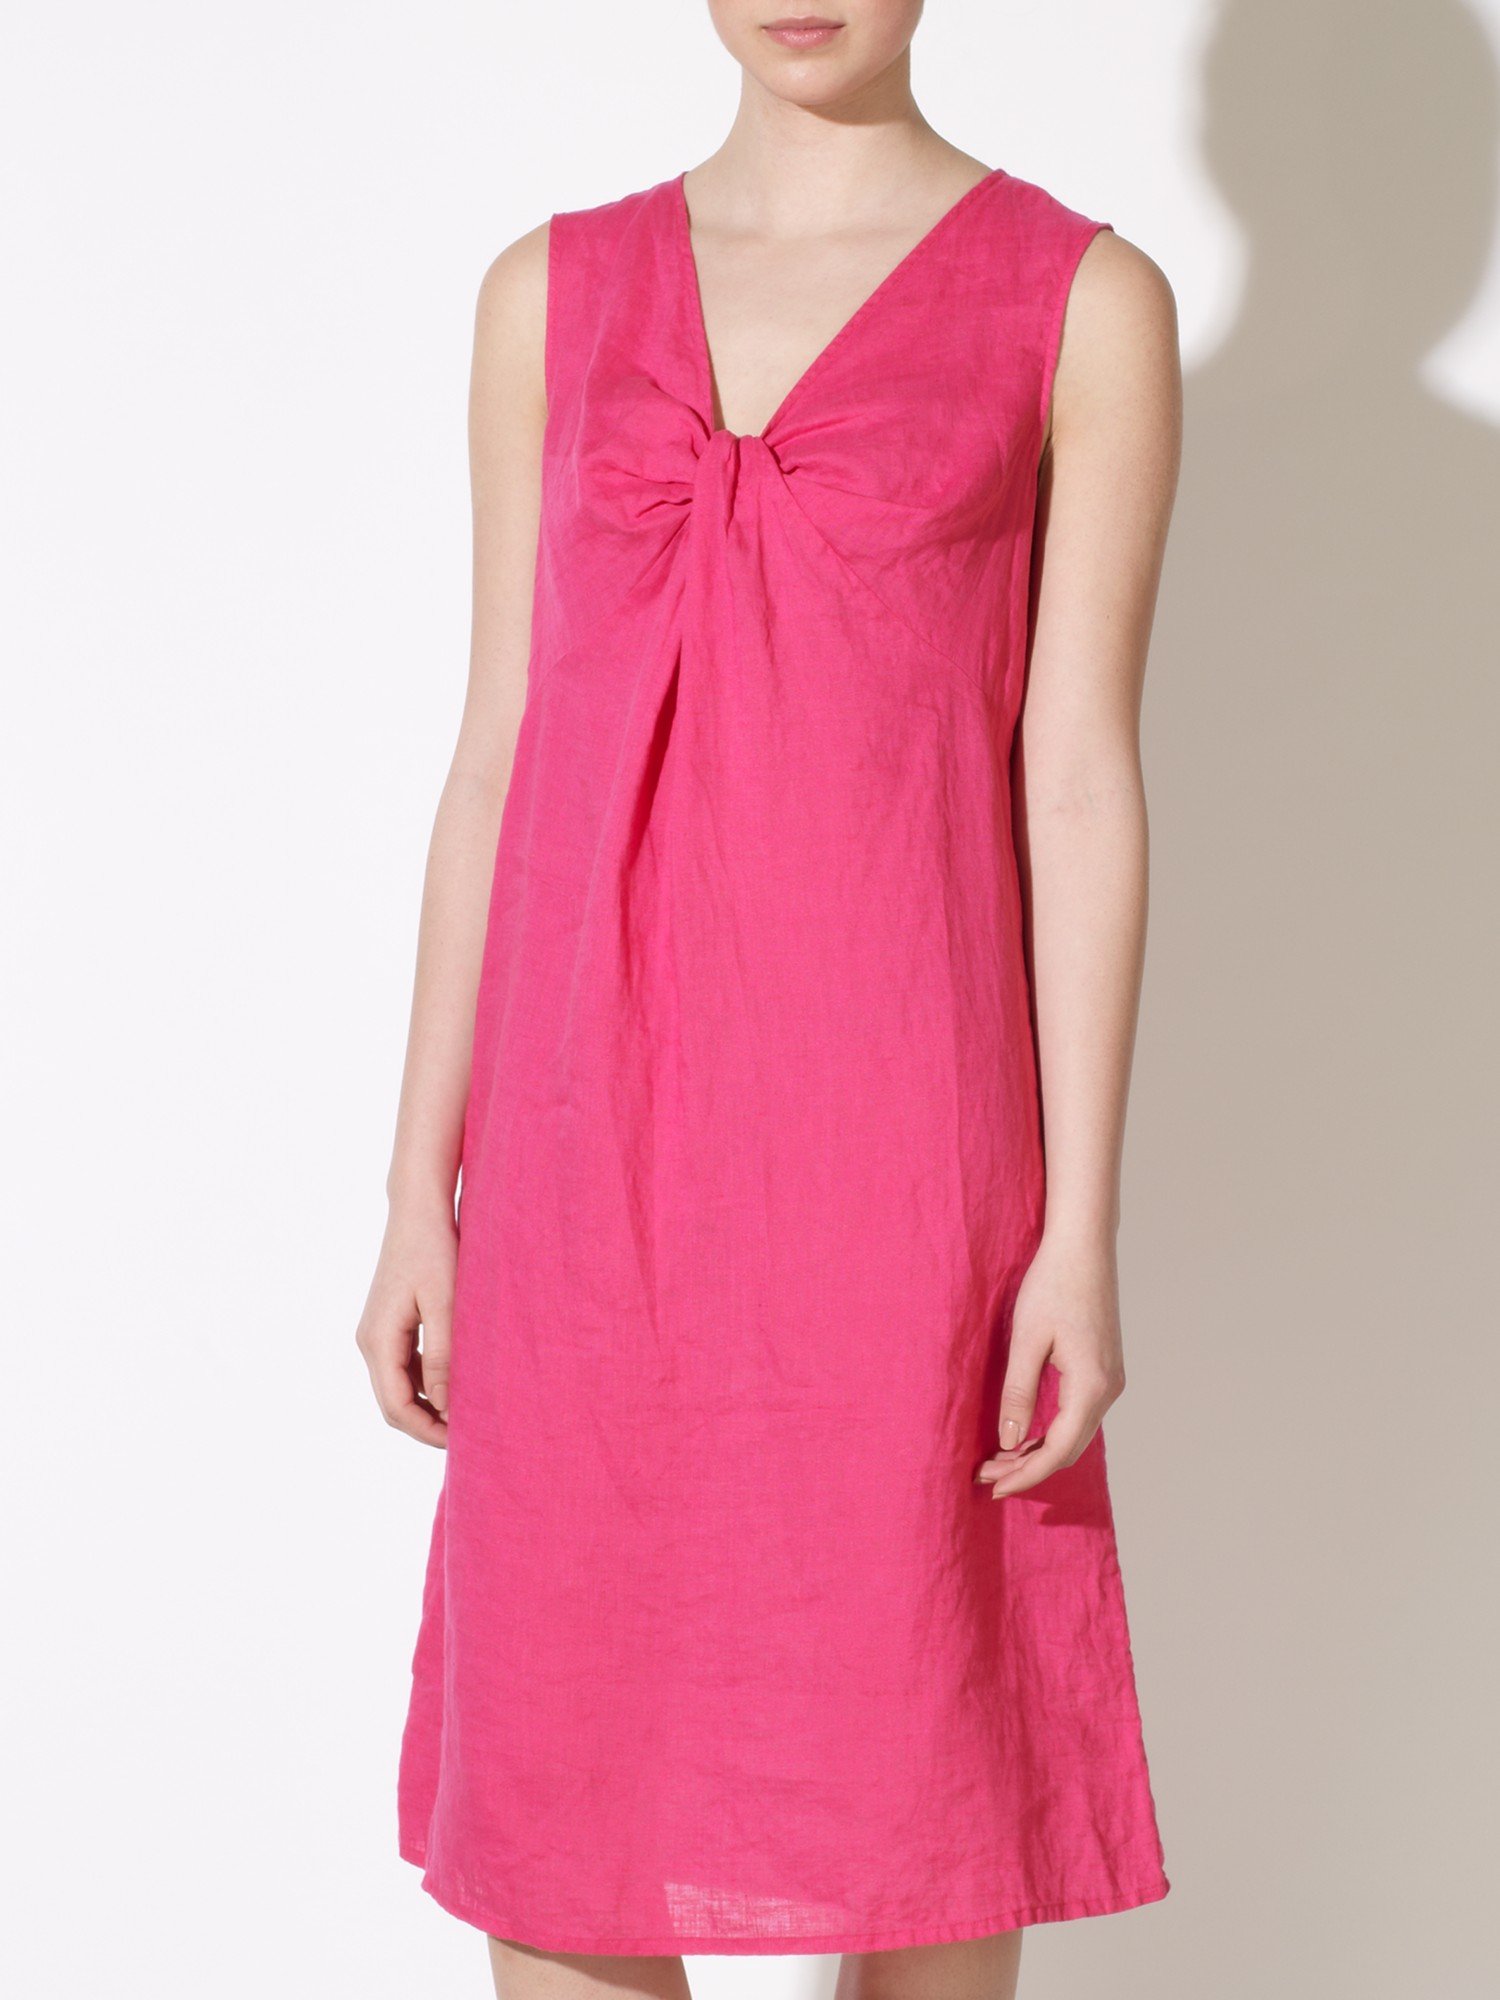 John Lewis Capsule Collection Linen Knot Dress in Pink | Lyst